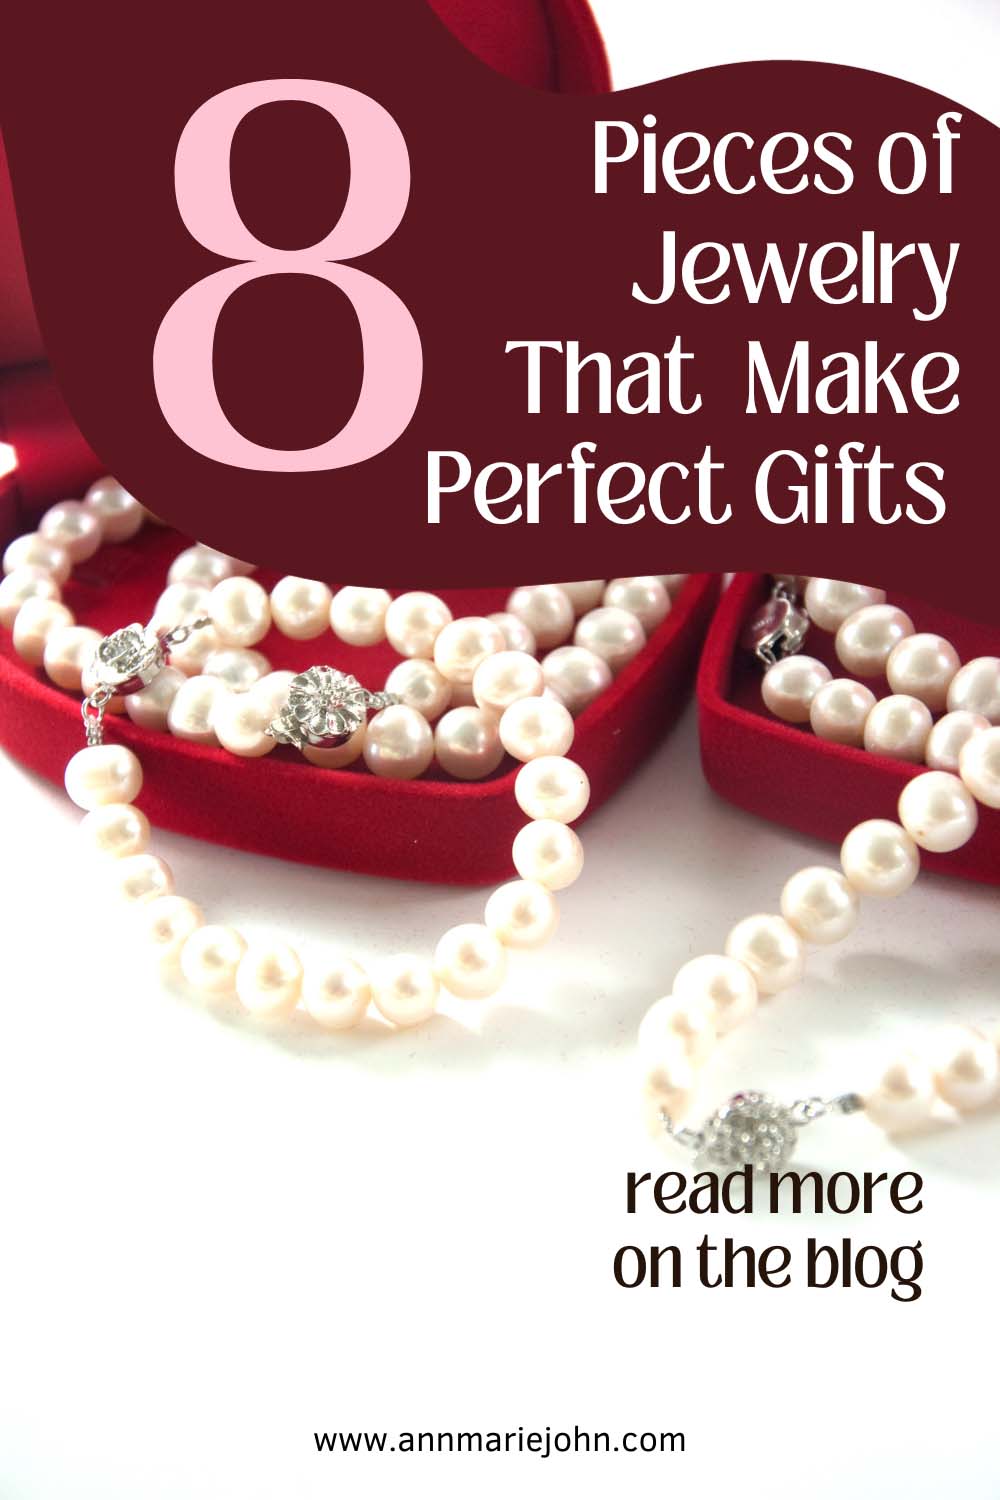 Pieces of Jewelry That Make Perfect Gifts